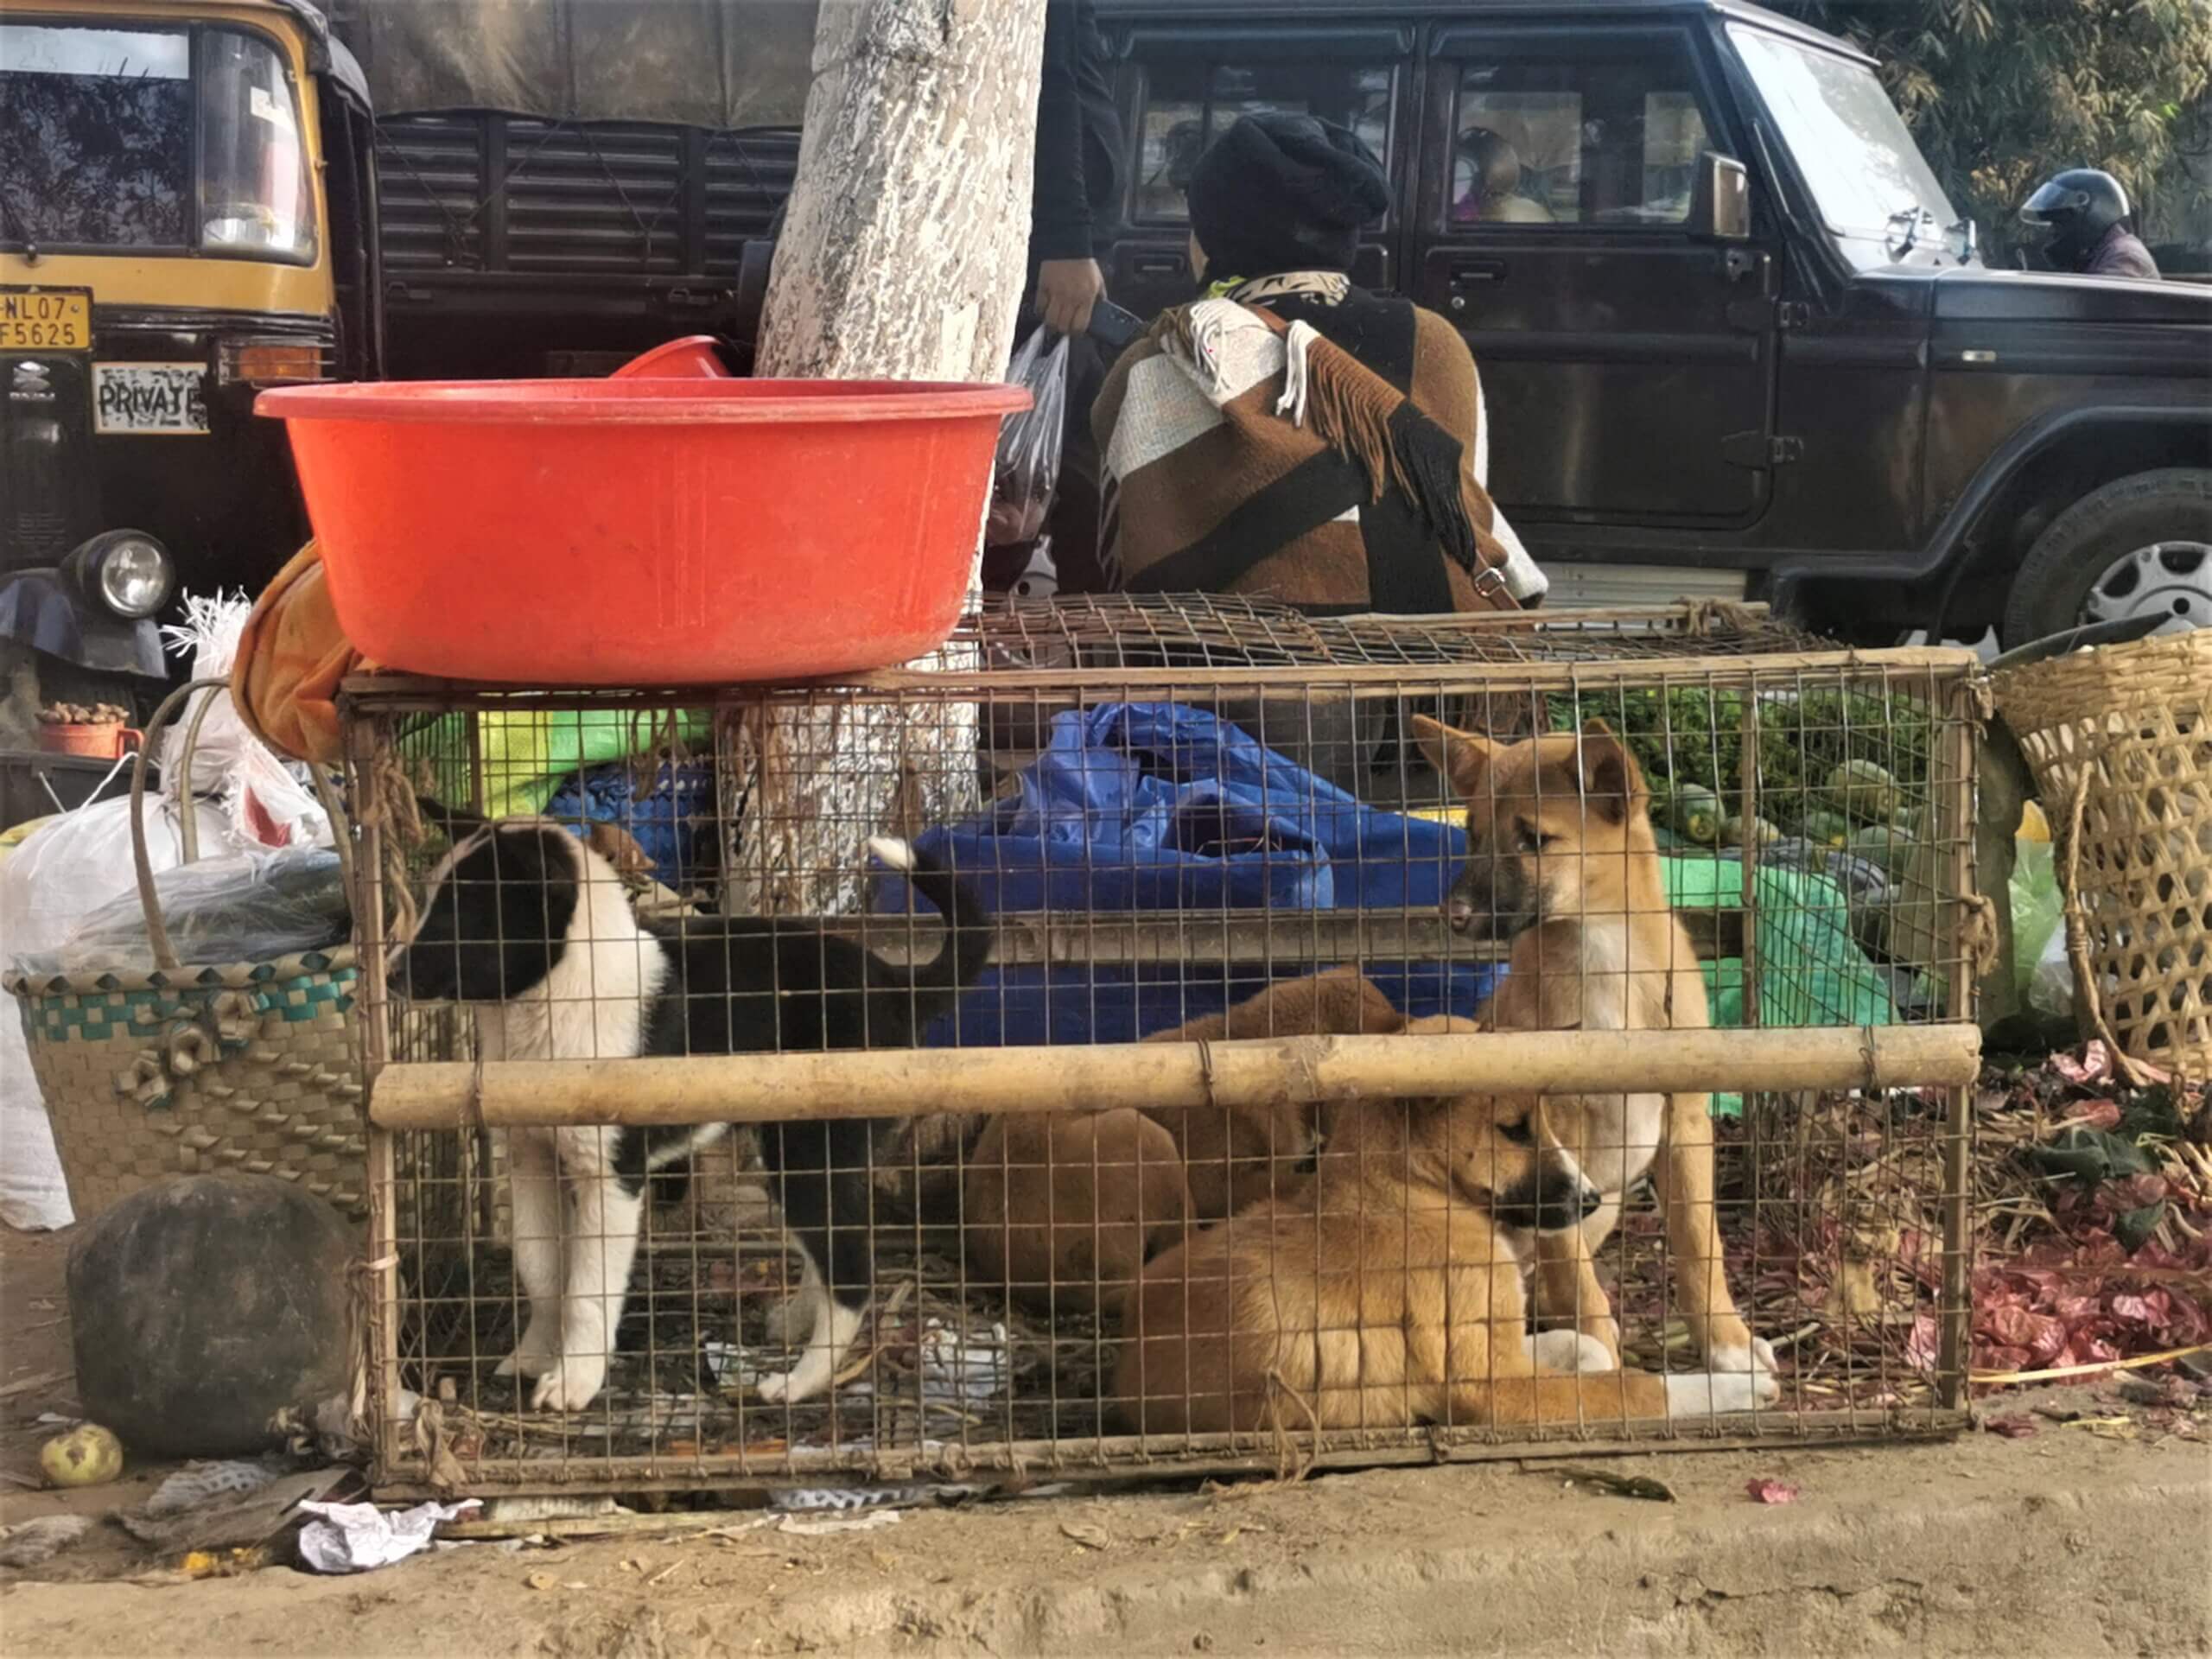 Dogs for sale in live animal market in India.